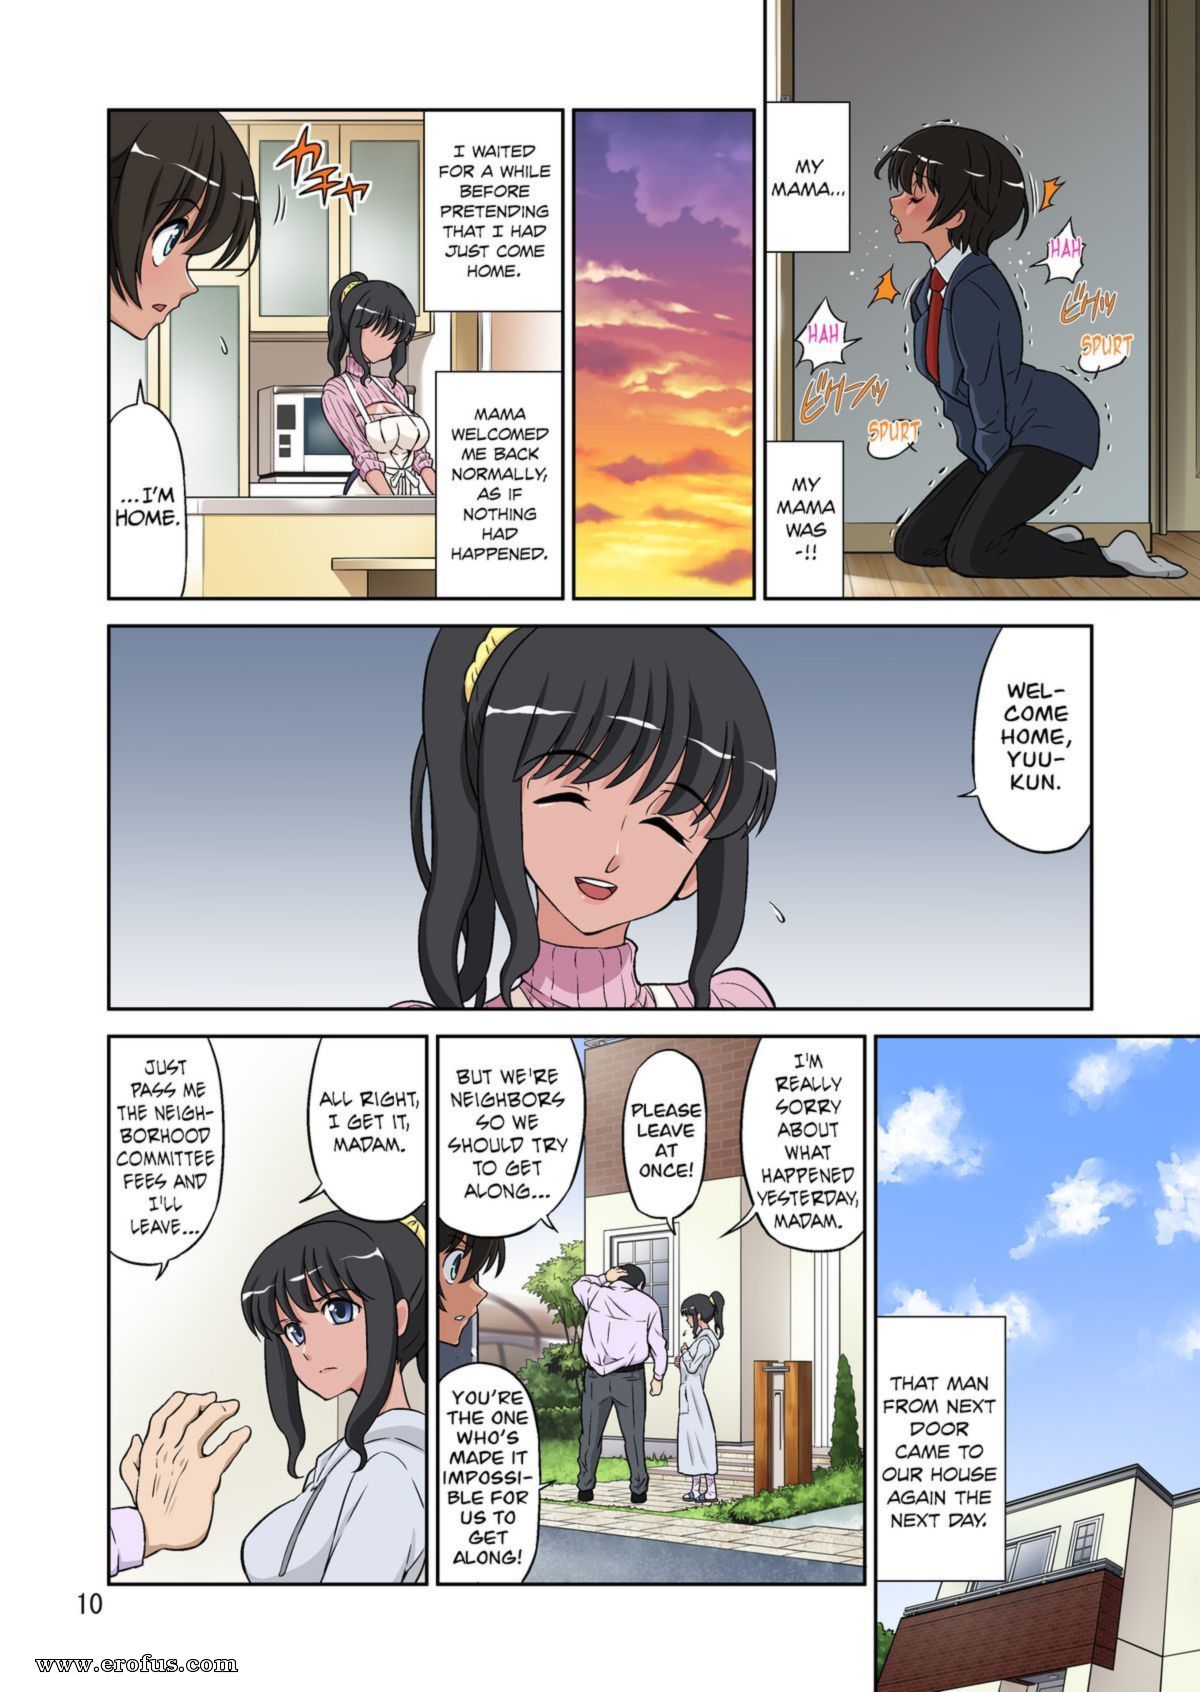 Page 52 hentai-and-manga-english/dozamura/mama-was-too-divine-so-our-neighbor-did-the-mating-press-on-her Erofus